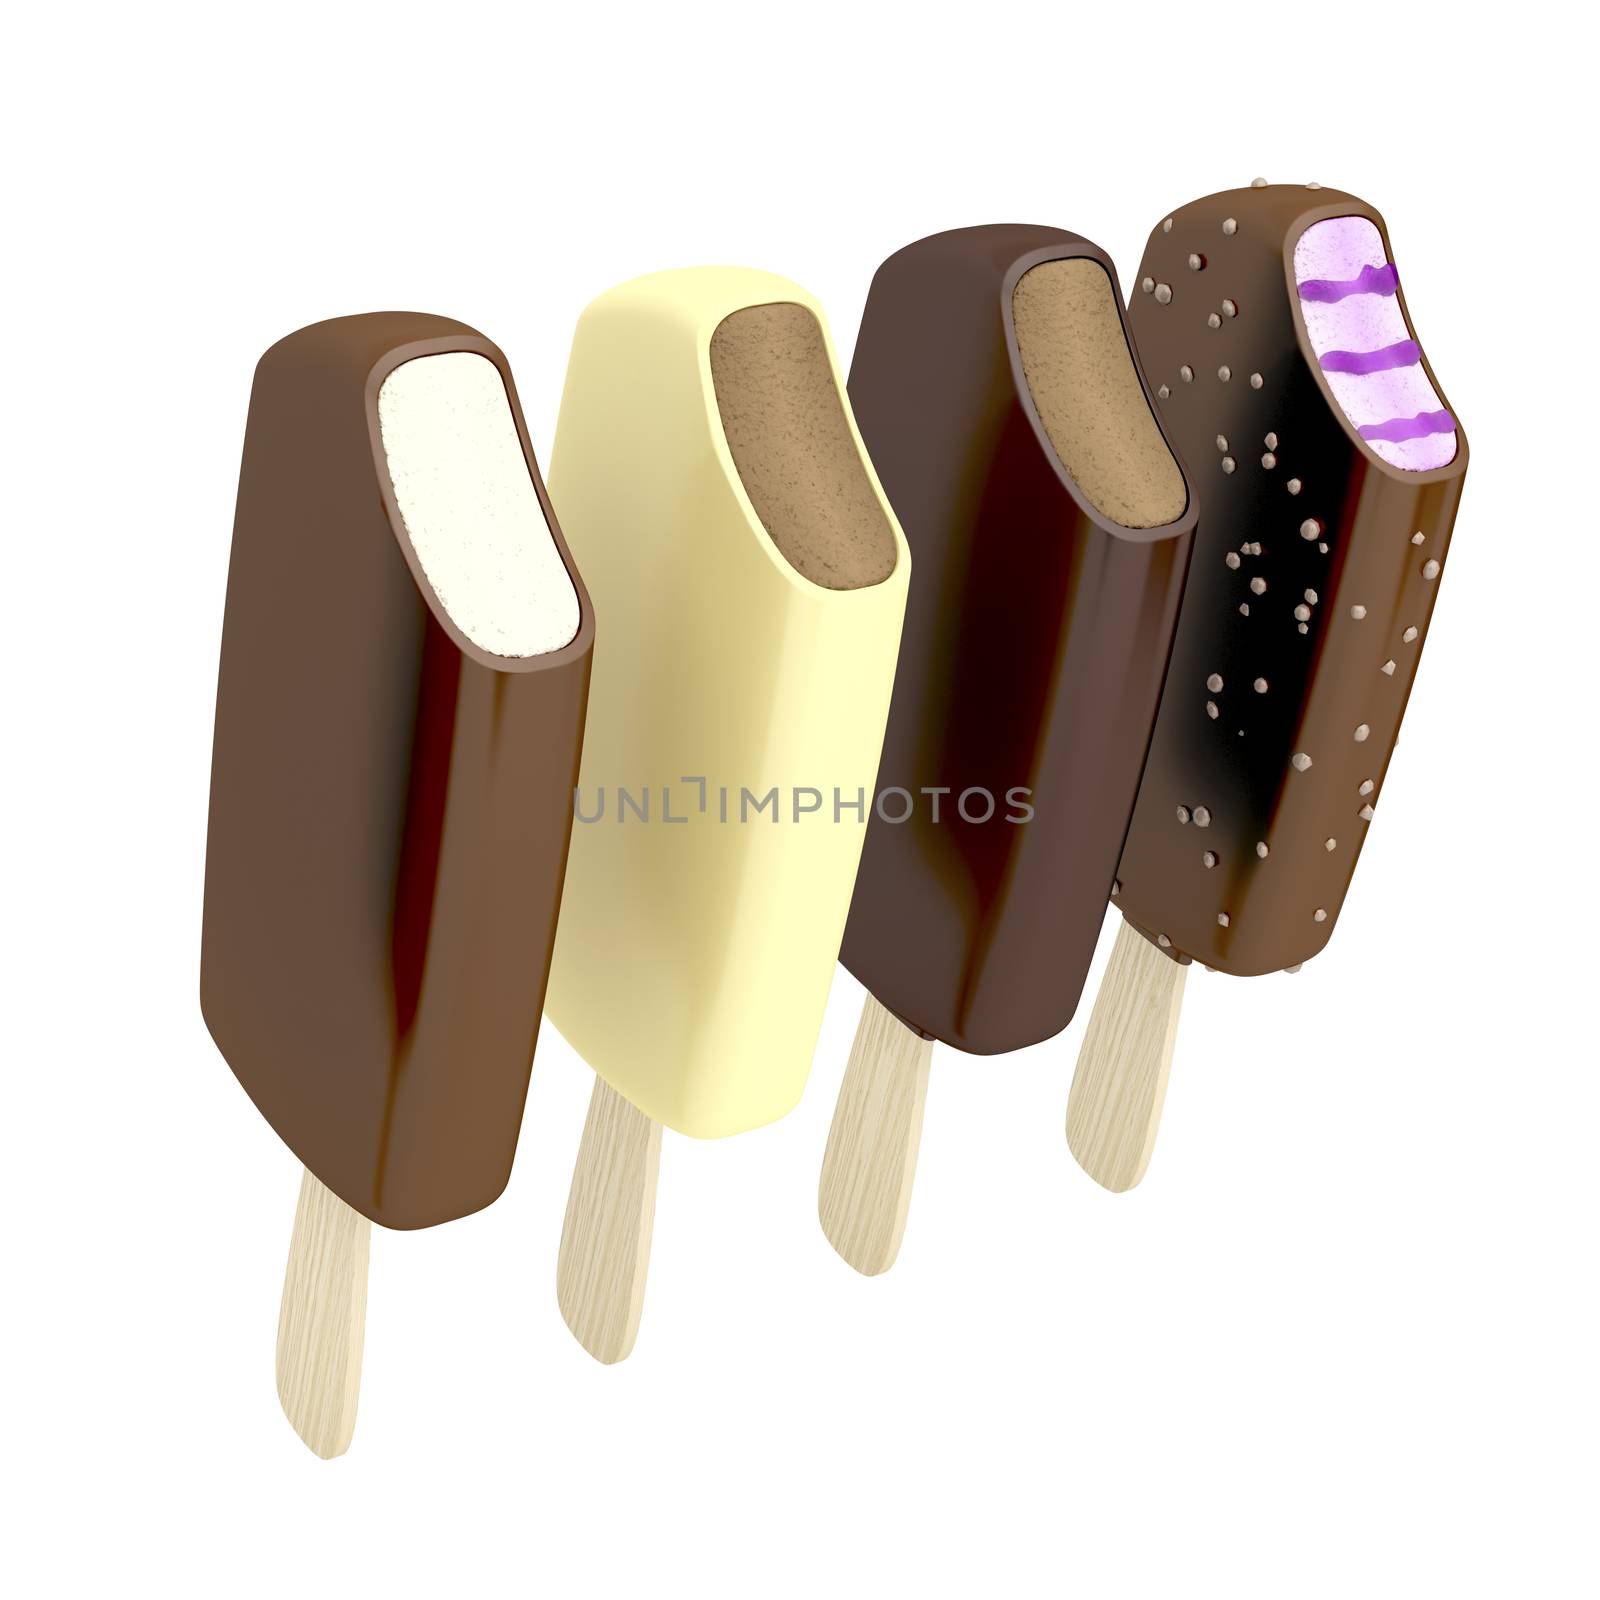 Four different ice creams by magraphics